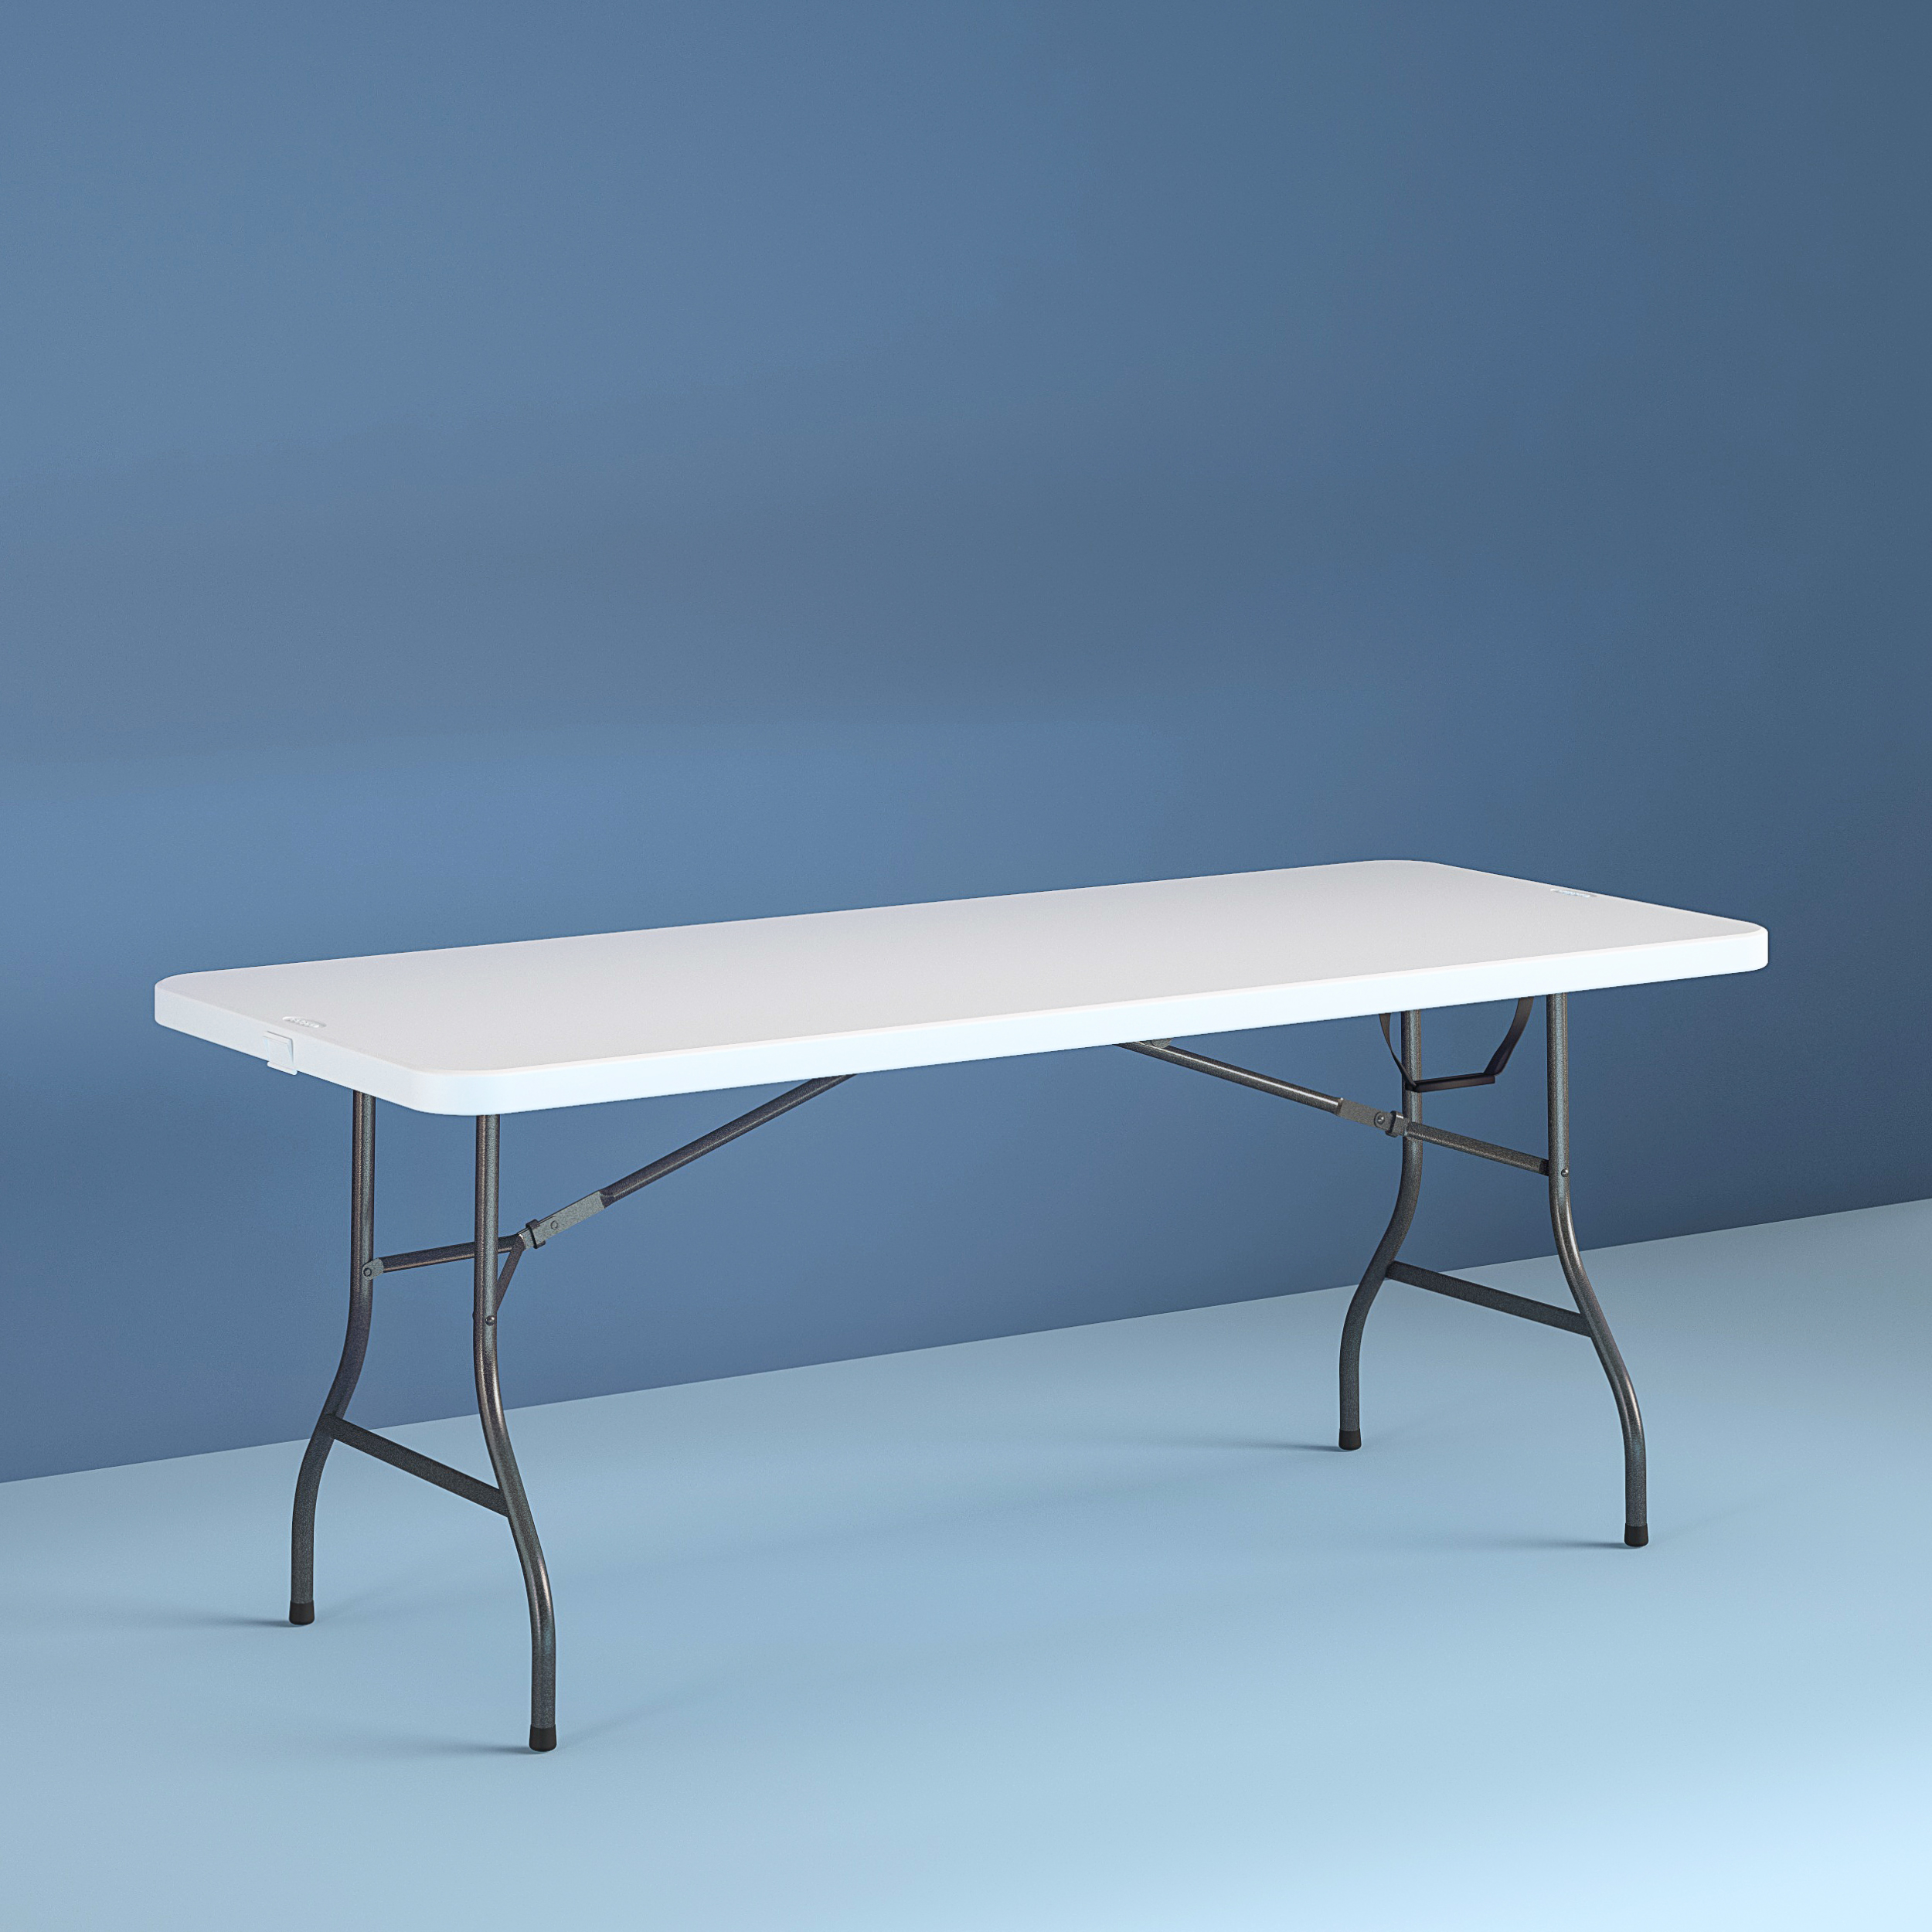 Cosco 8 Foot Centerfold Folding Table, White - image 1 of 14